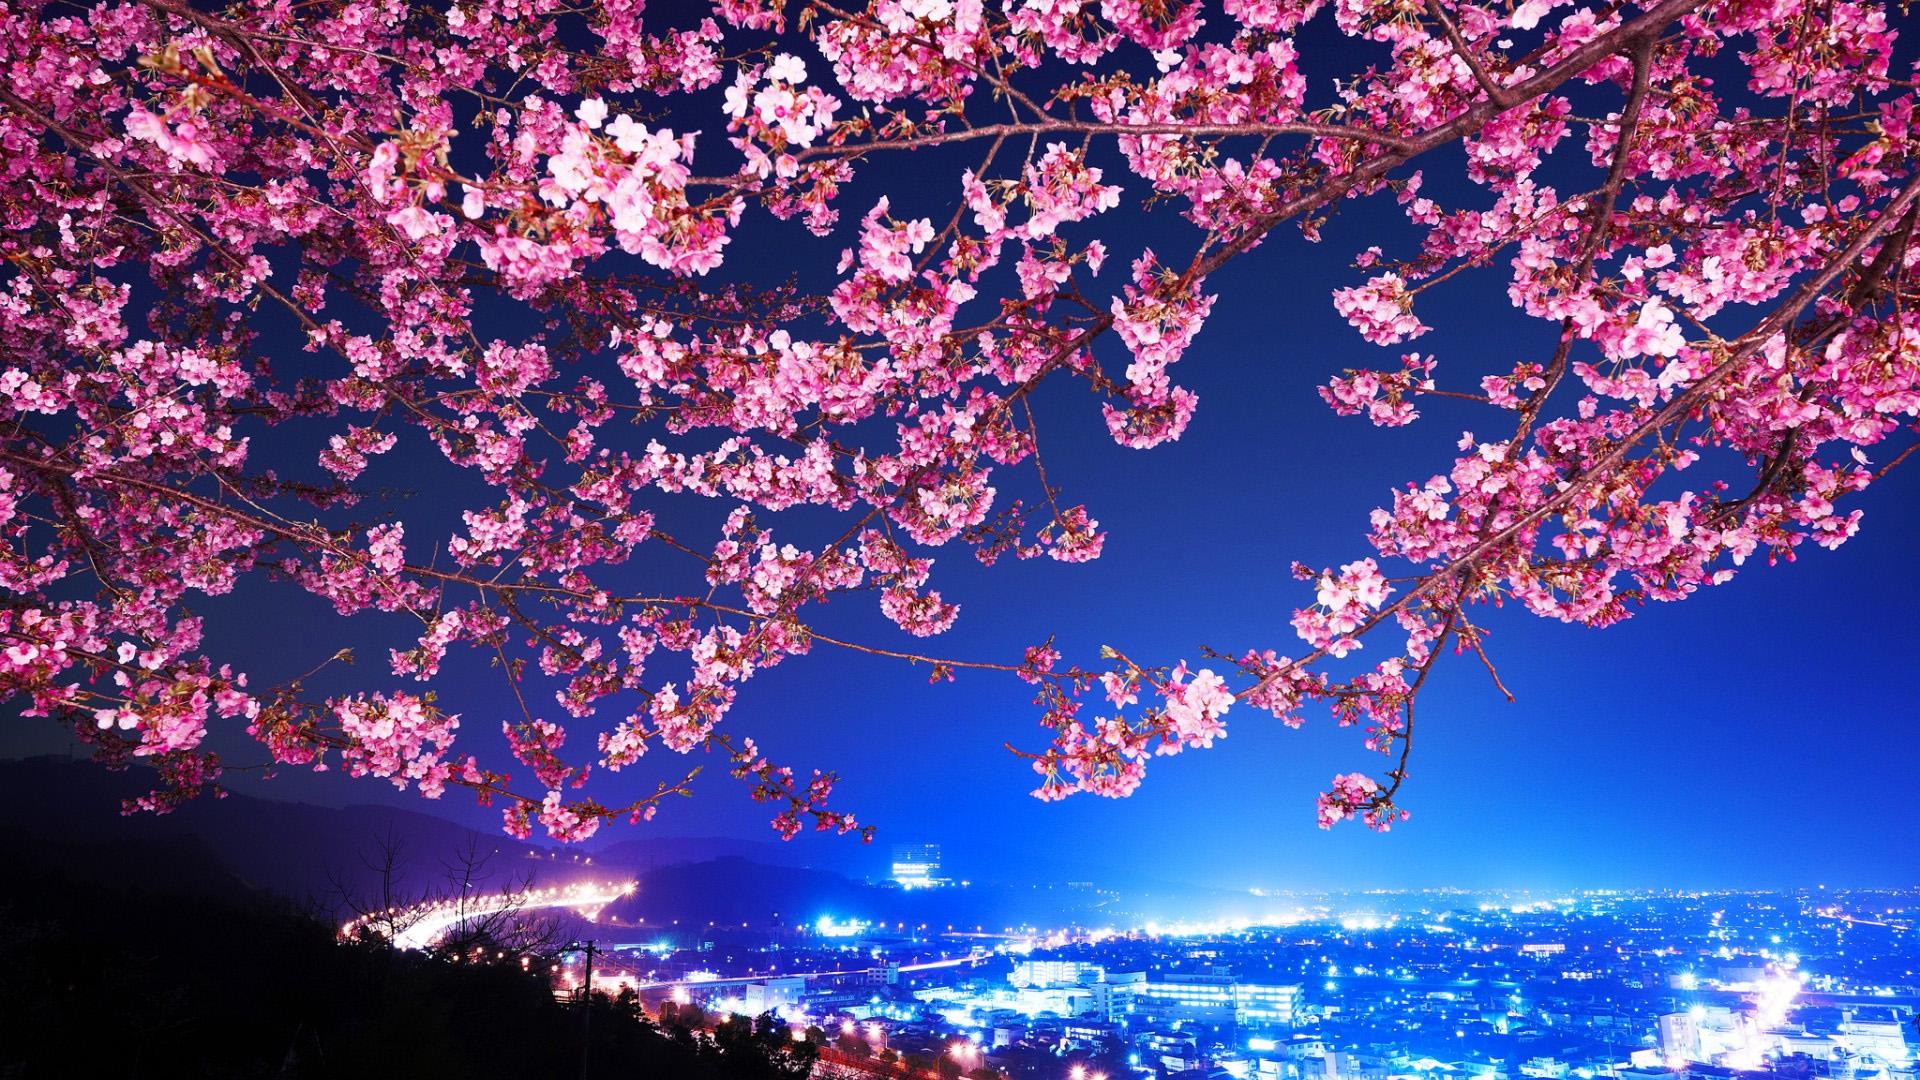 1080p HD Japan Wallpapers For Free Download The